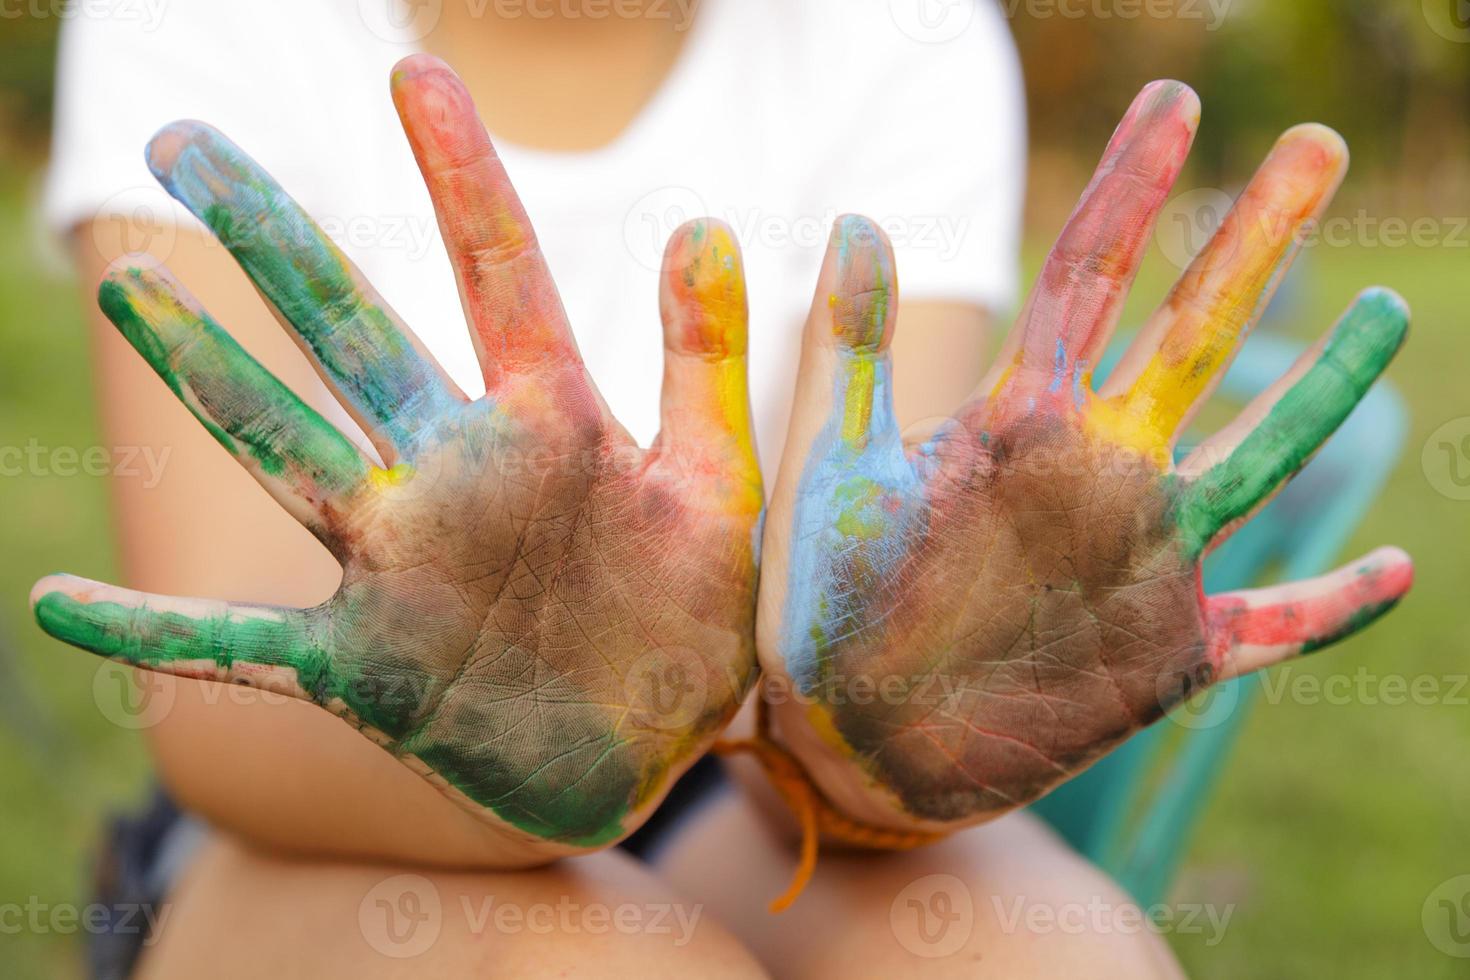 Asian little girl with hands painted in colorful paints photo